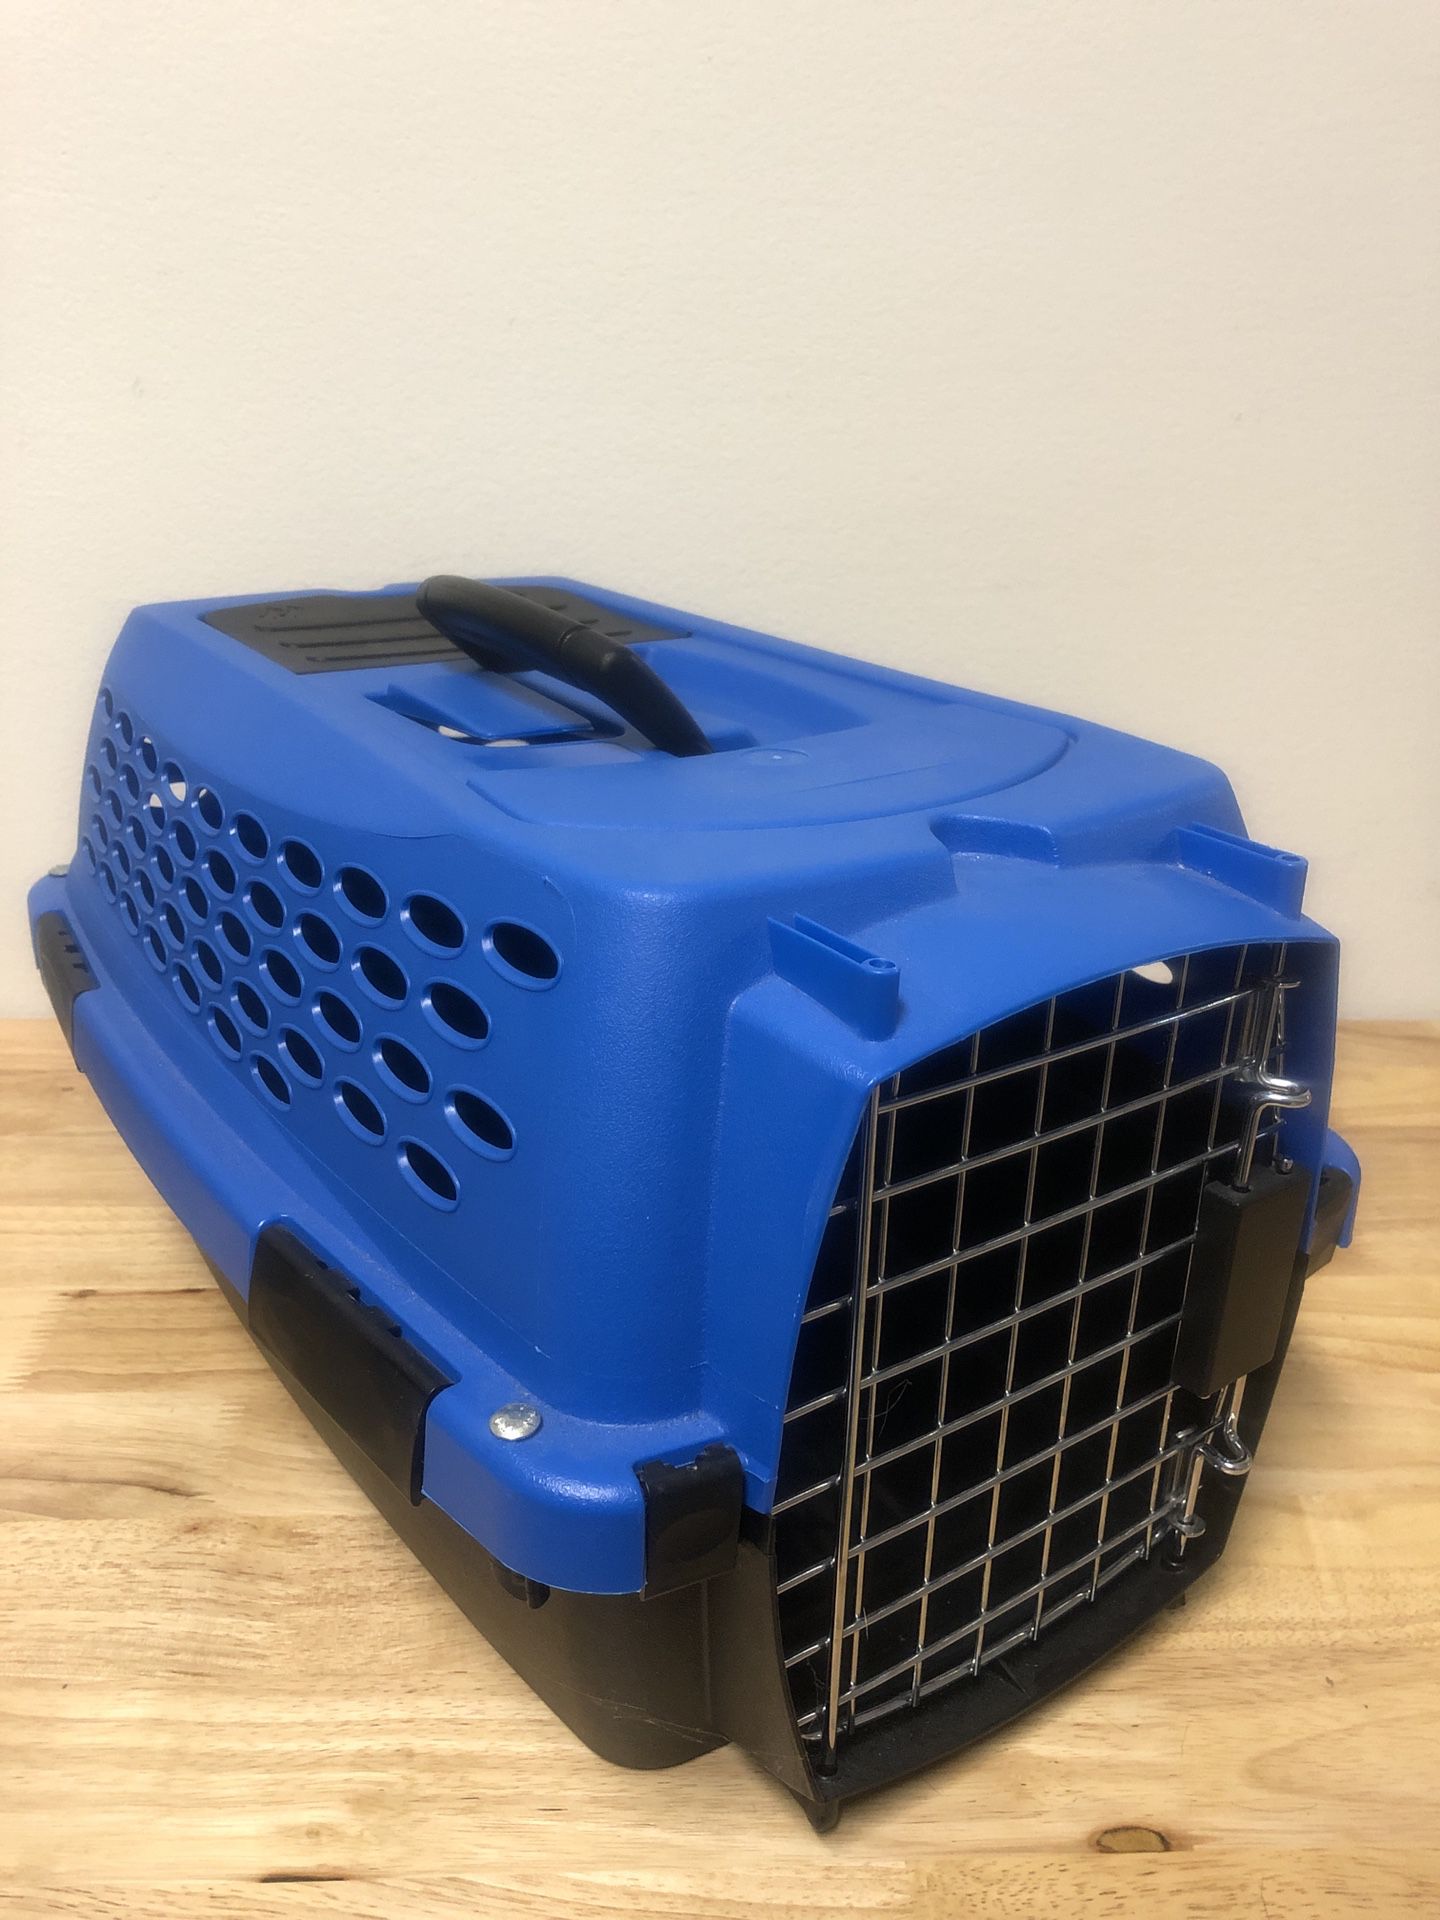 PETMATE KENNEL CAB PET CARRIER TRAVEL CAT SMALL DOG LIGHTWEIGHT TRANSPORT CRATE